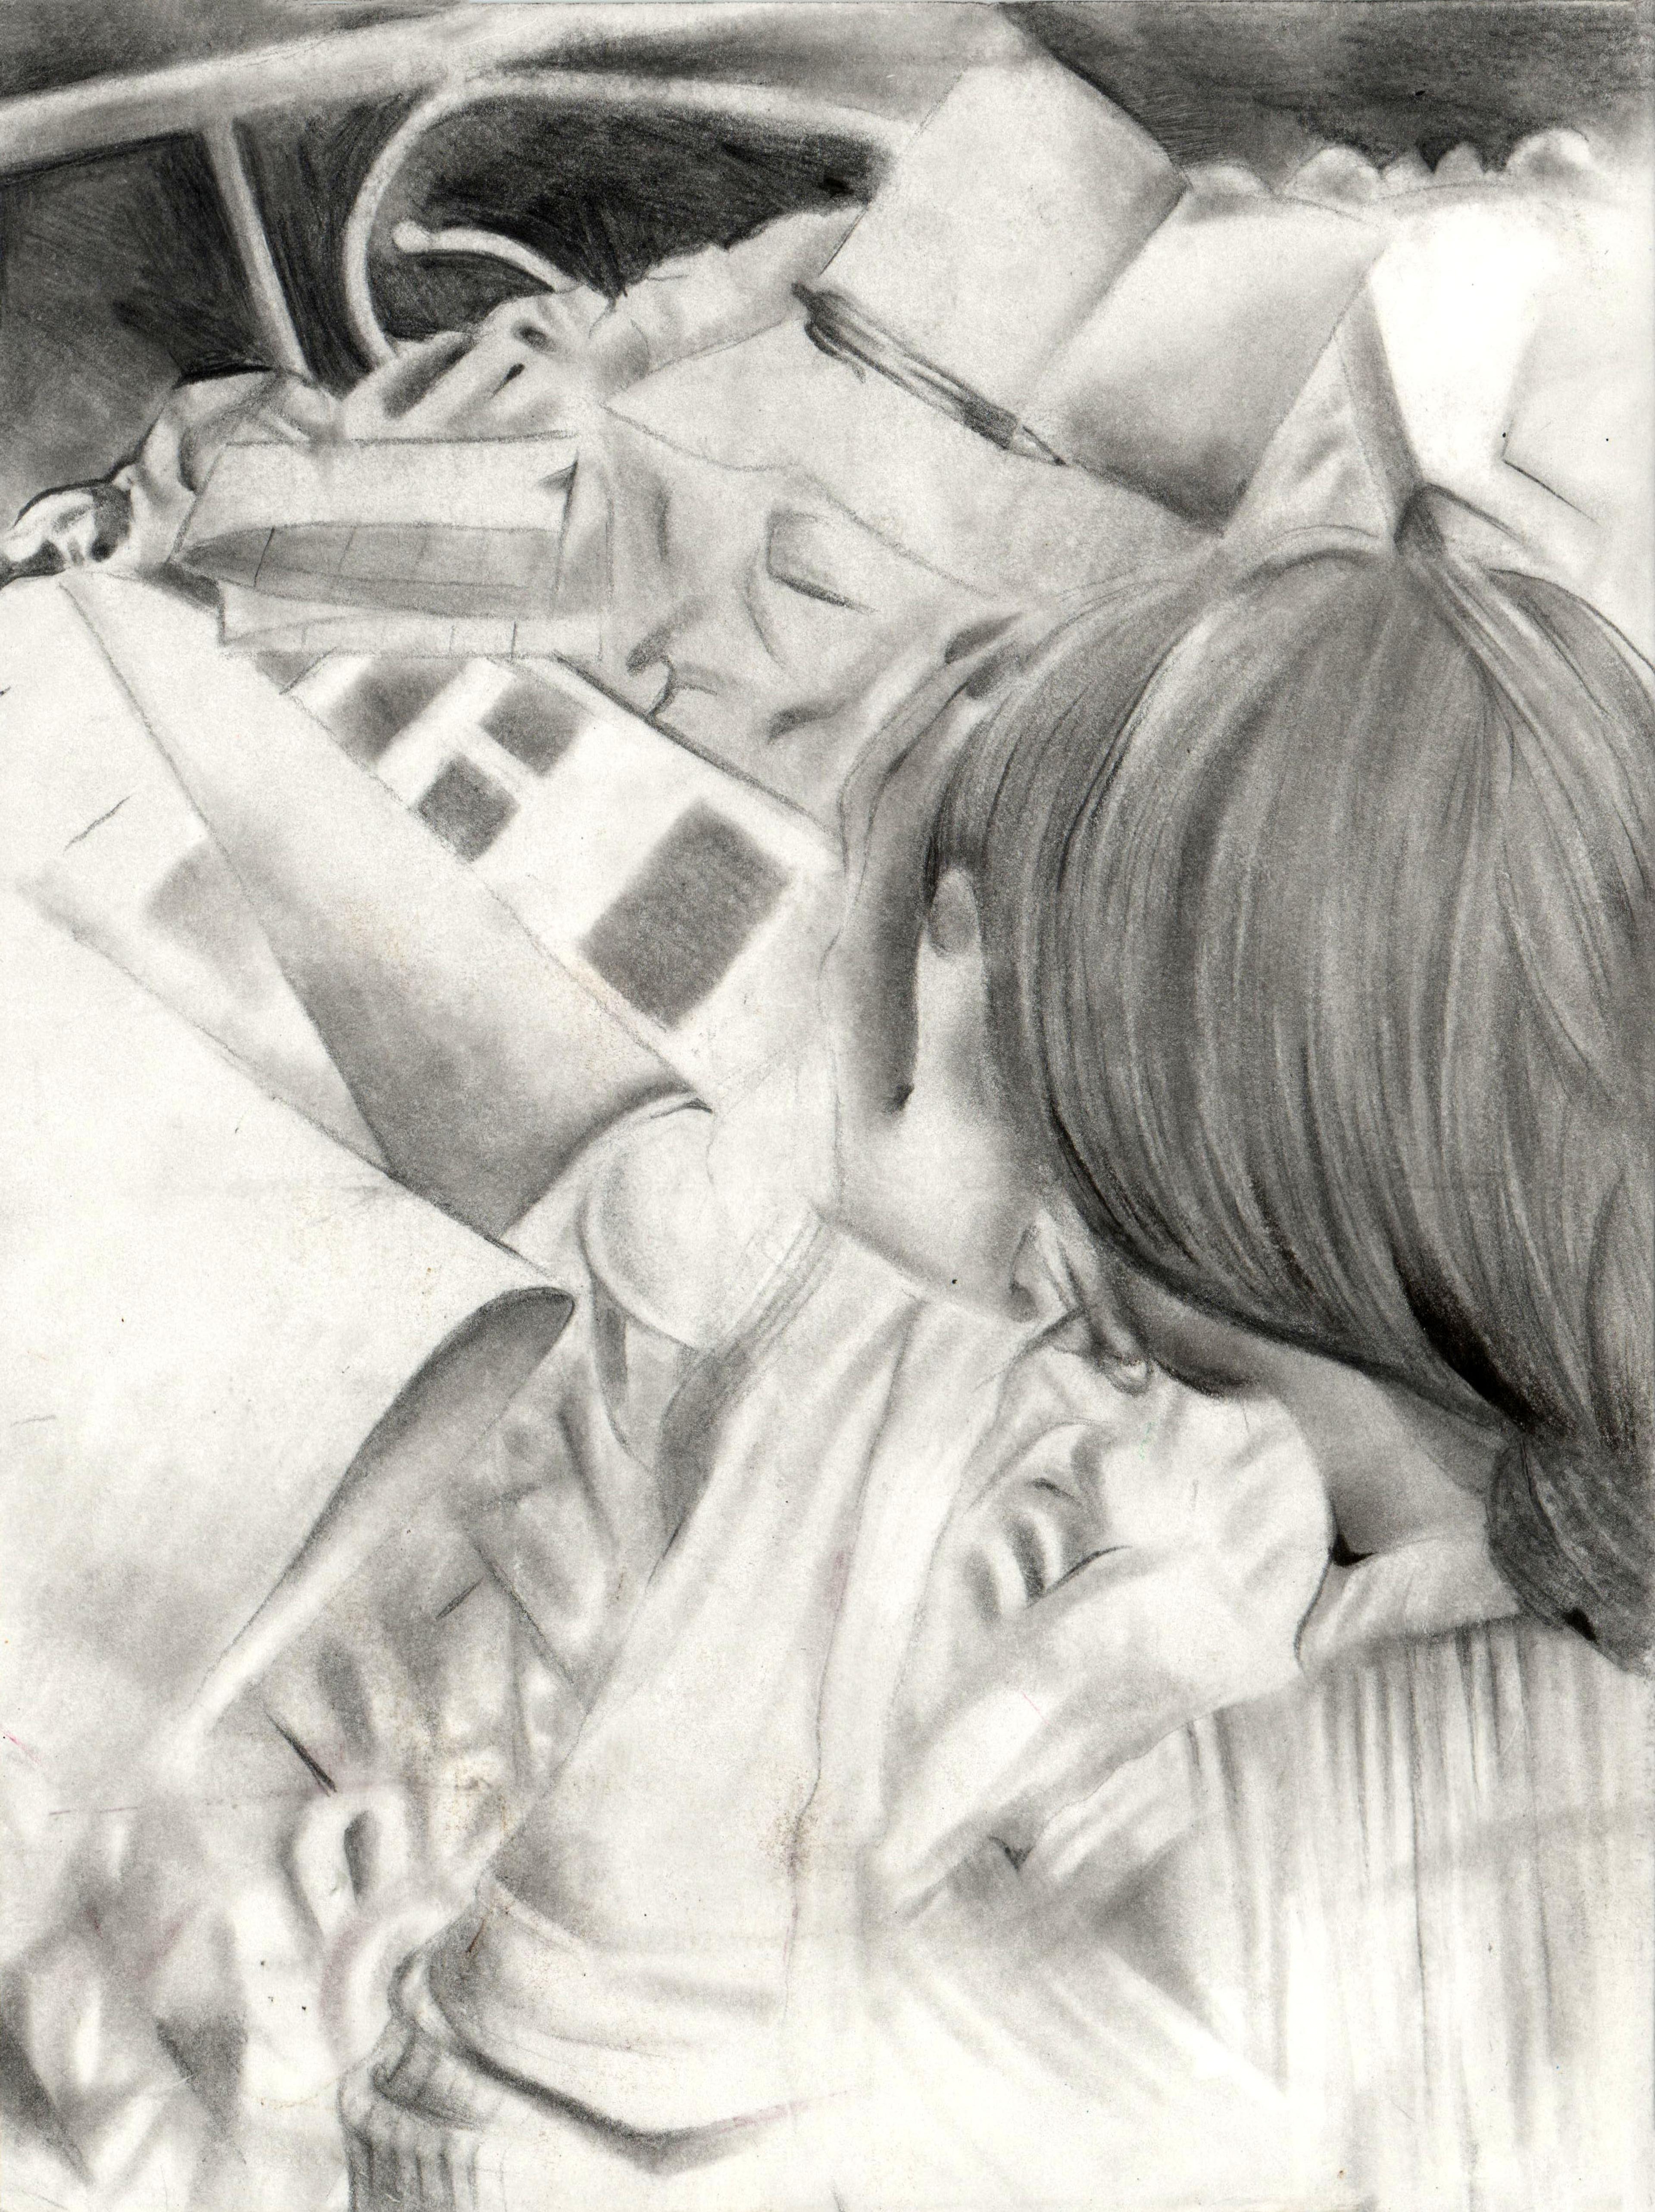 Black-and-white drawing of an adolescent girl made with graphite pencil. The girl is seen from overhead and behind her shoulders. She wears a light colored long sleeved shirt and has long medium dark hair tied in the back. She holds her left hand against the side of her forehead, gazing down at an uneven pile of open books laid out on the desk before her.